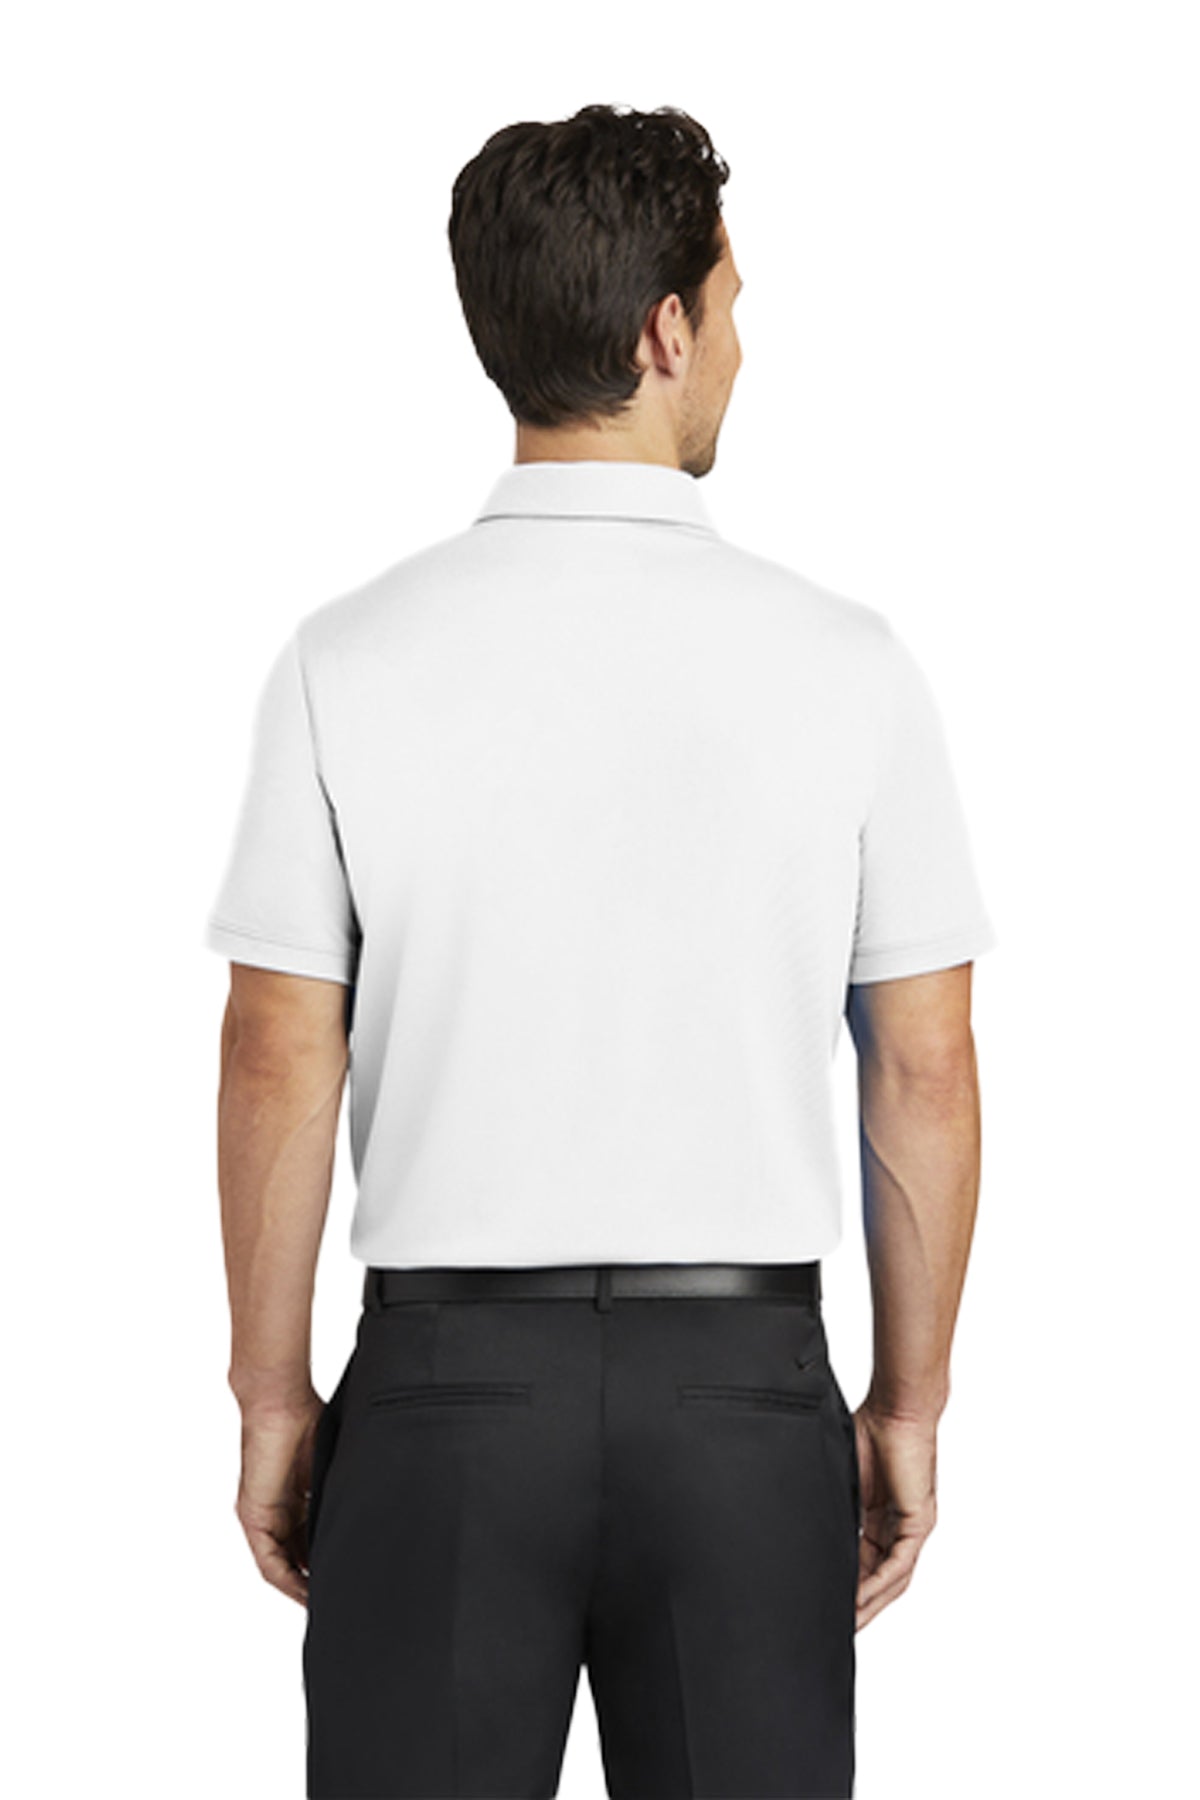 Load image into Gallery viewer, Nike Dri-FIT Solid Icon Pique Modern Fit Polo
